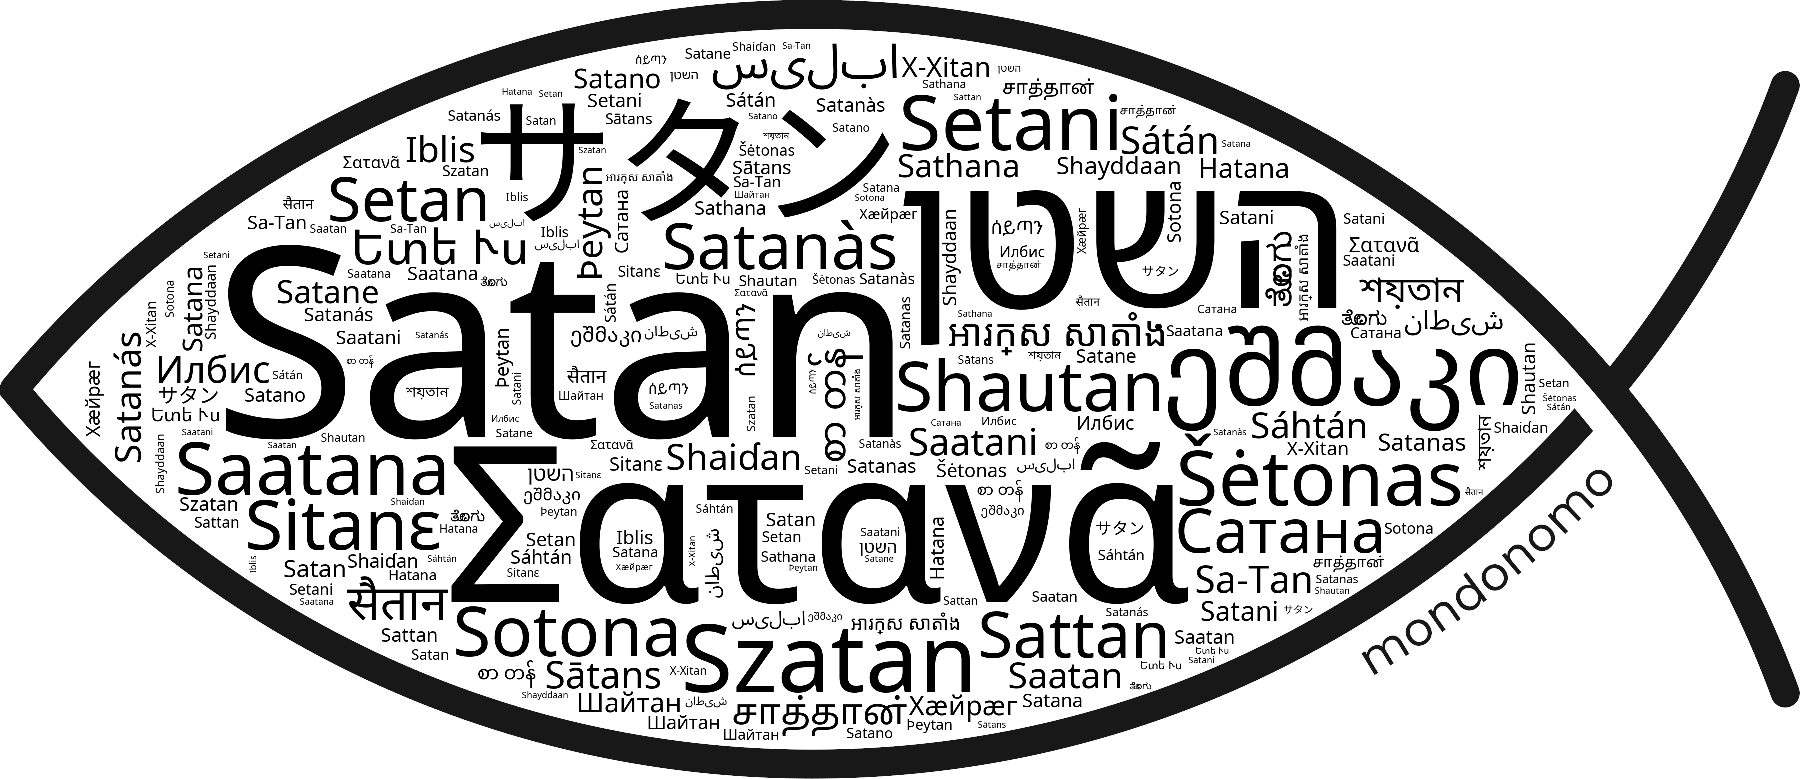 Name Satan in the world's Bibles